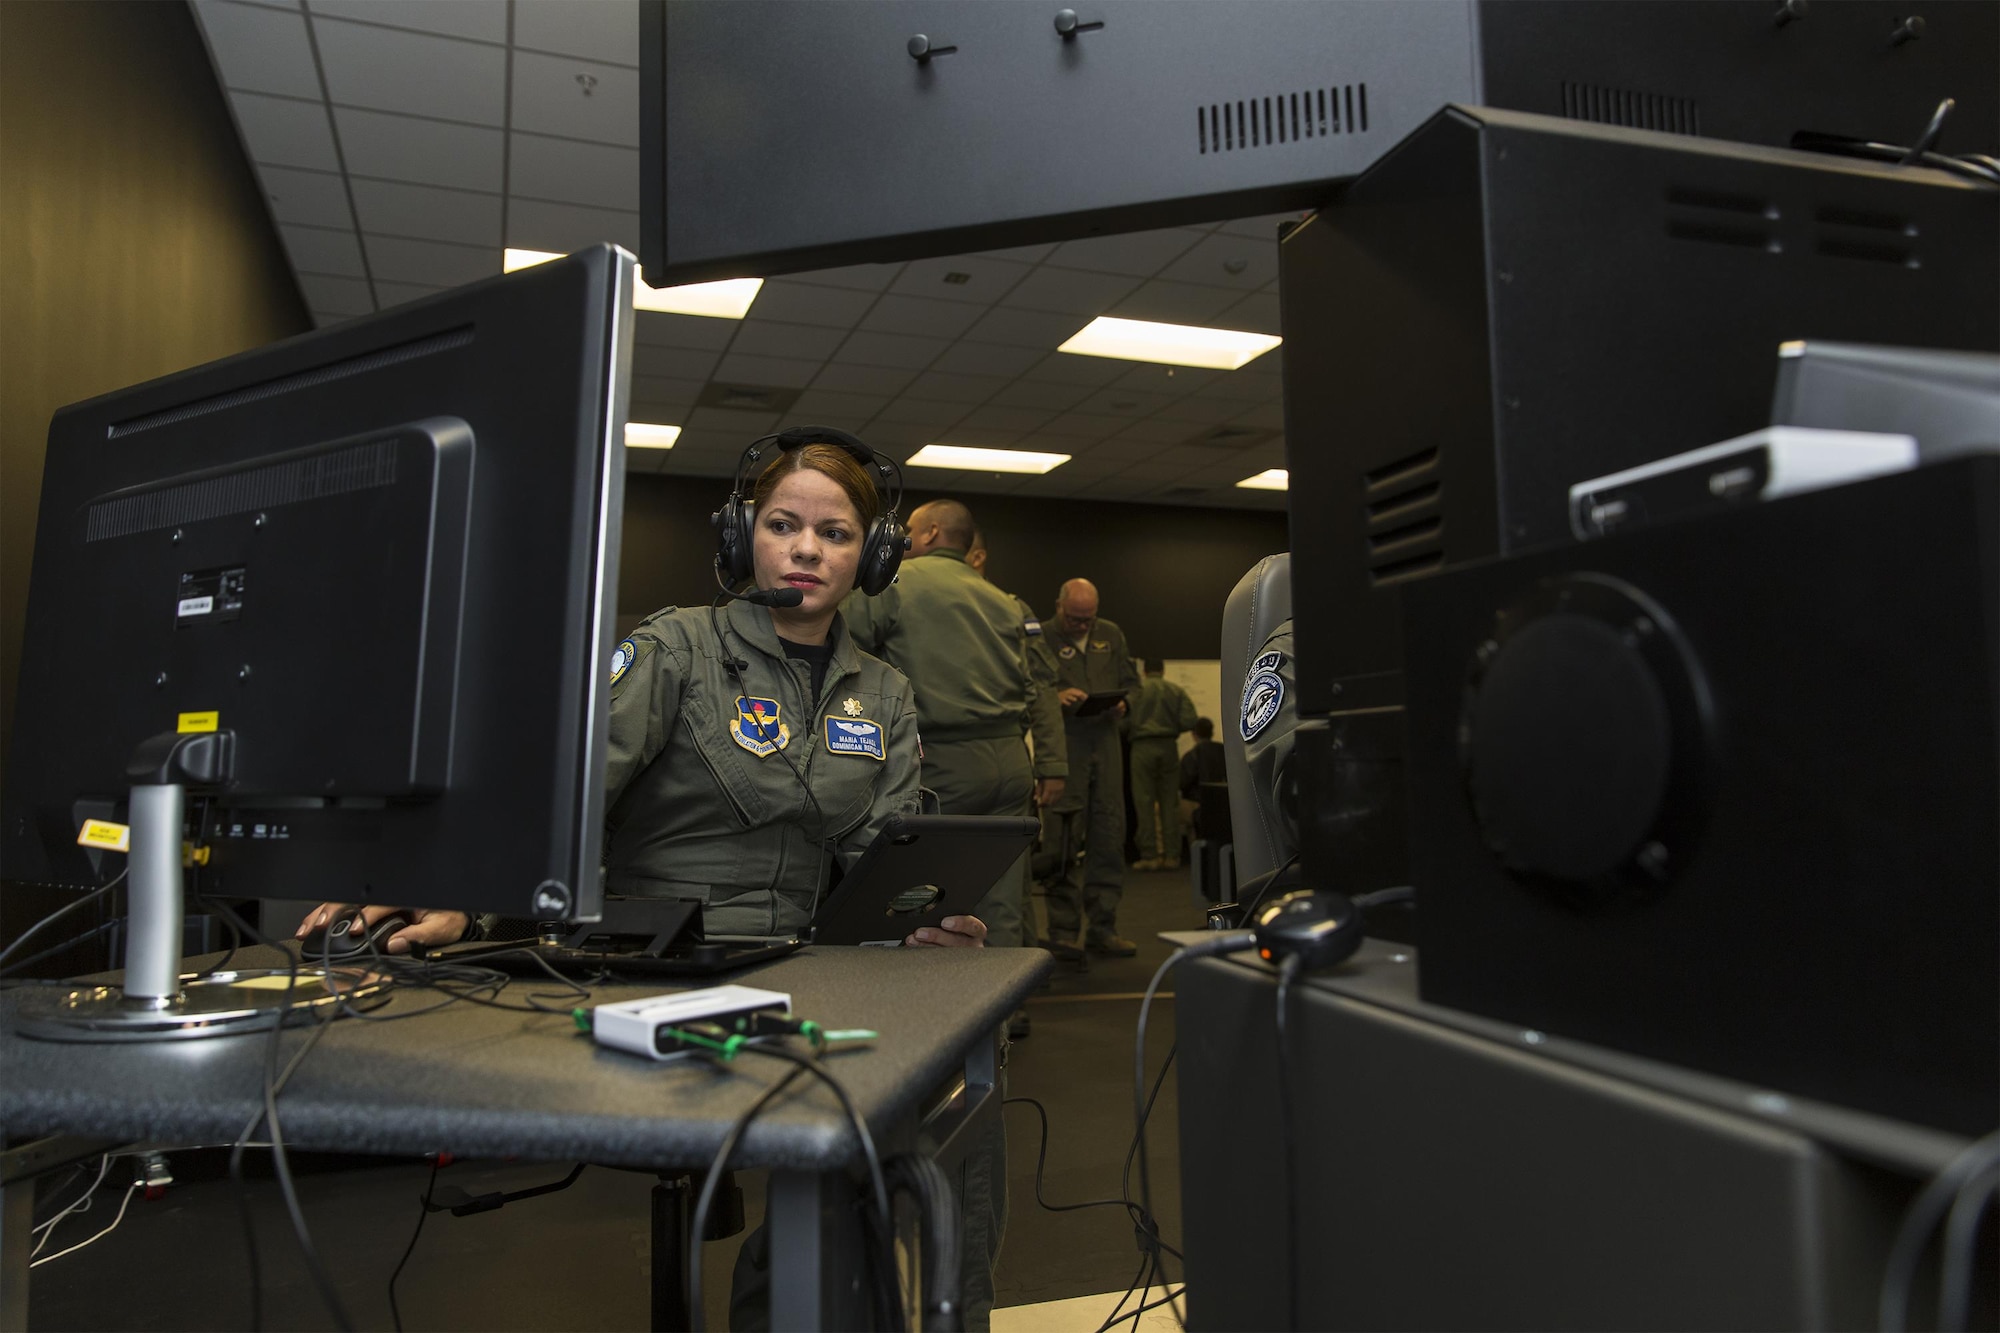 Maj. Maria Tejada-Quintana, a guest instructor at the Inter-American Air Forces Academy at Joint Base San Antonio-Lackland, is the only female flight guest instructor teaching international students from partner nations in the Western Hemisphere.